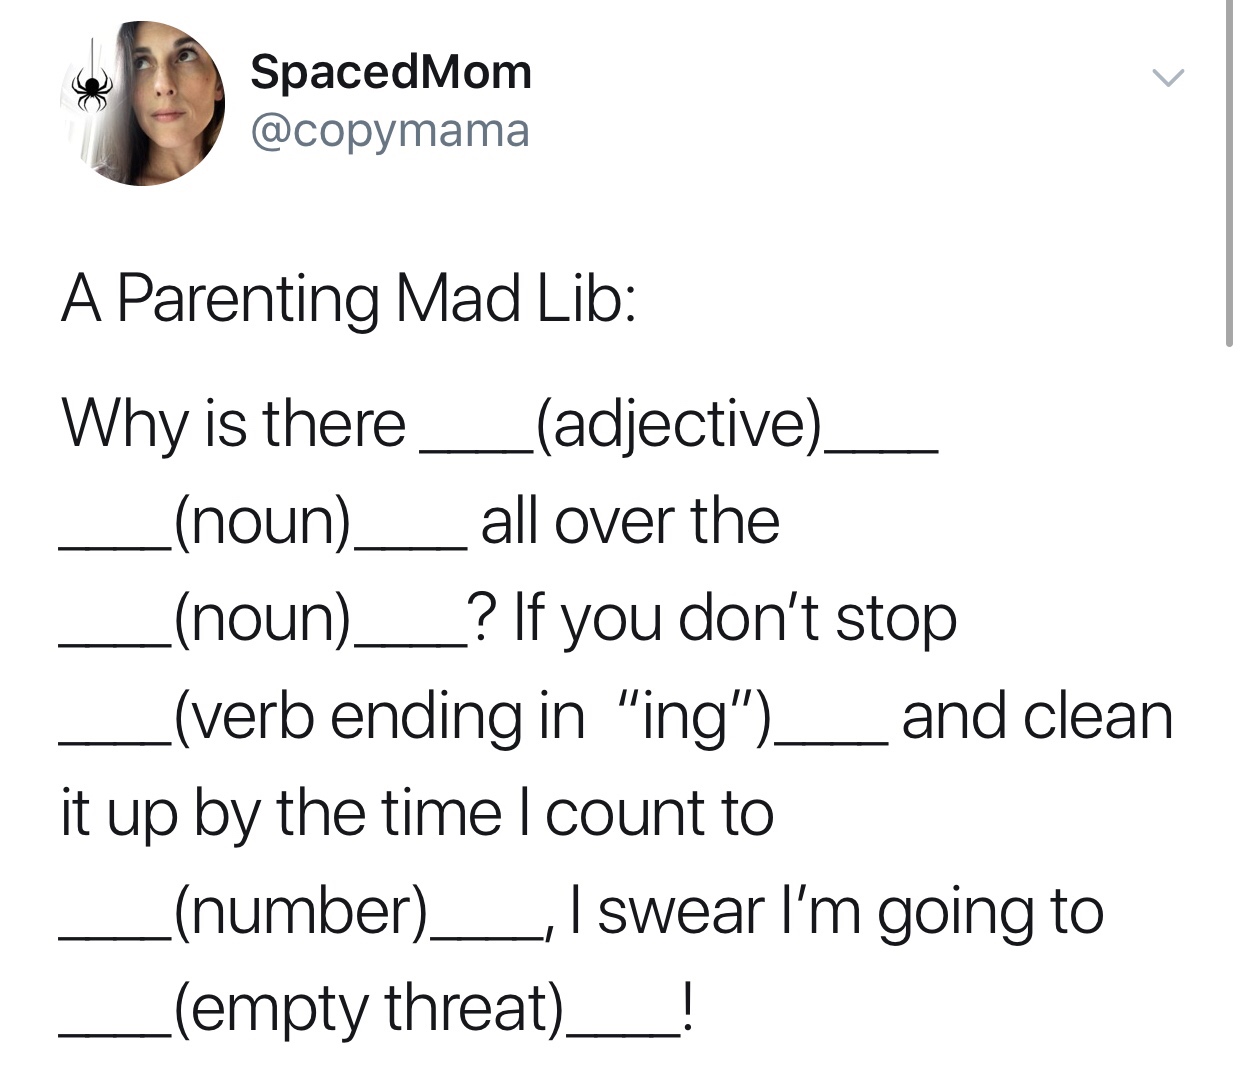 document - SpacedMom A Parenting Mad Lib Why is there_ adjective_ noun __all over the _noun___? If you don't stop _verb ending in "ing"__ and clean it up by the time I count to number__, I swear I'm going to empty threat !